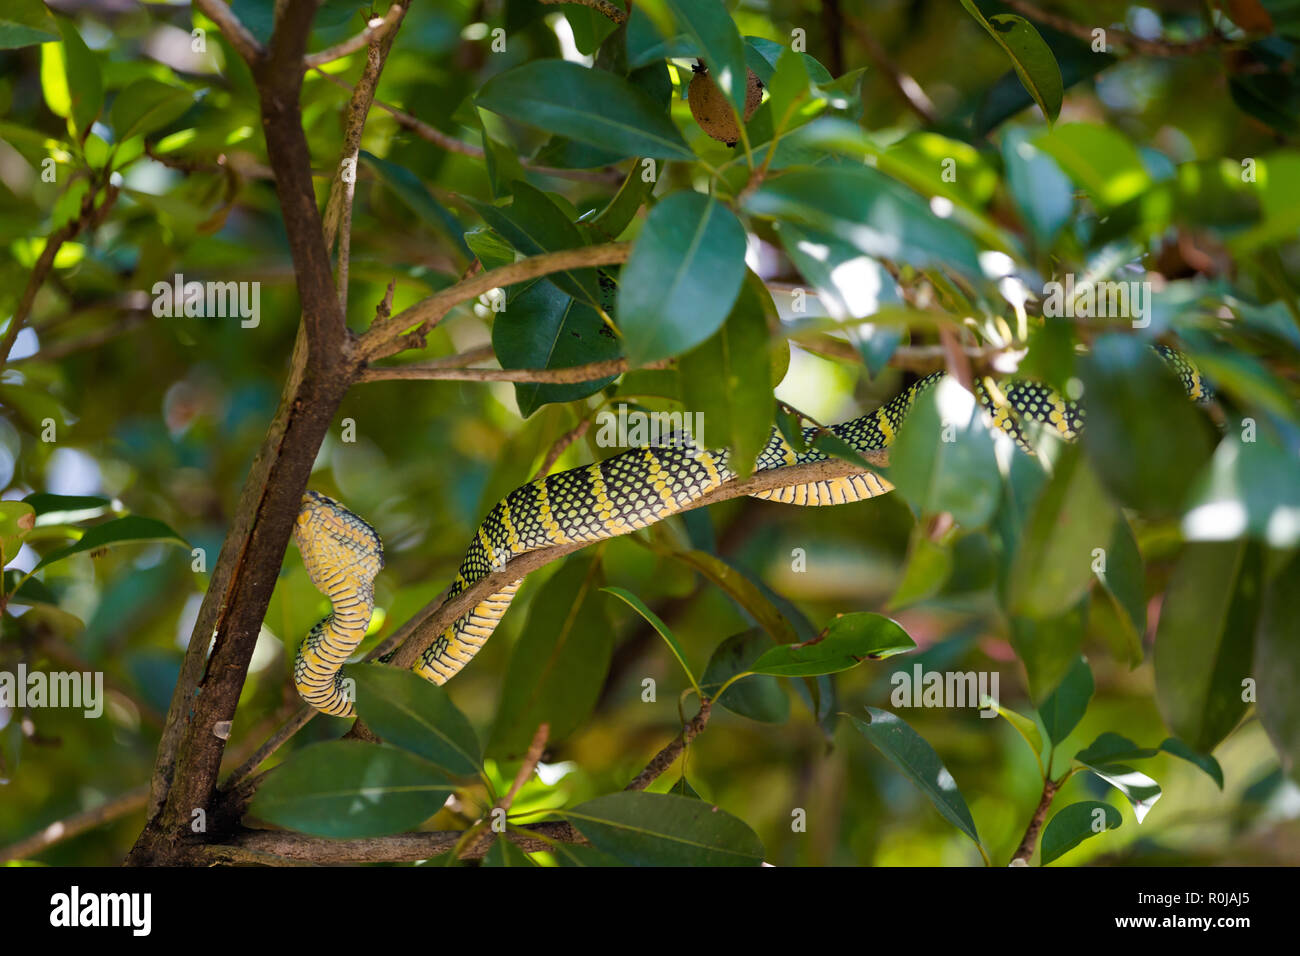 Snake temple on Penang island in Malaysia. Dangerous fauna of south east Asia. Stock Photo